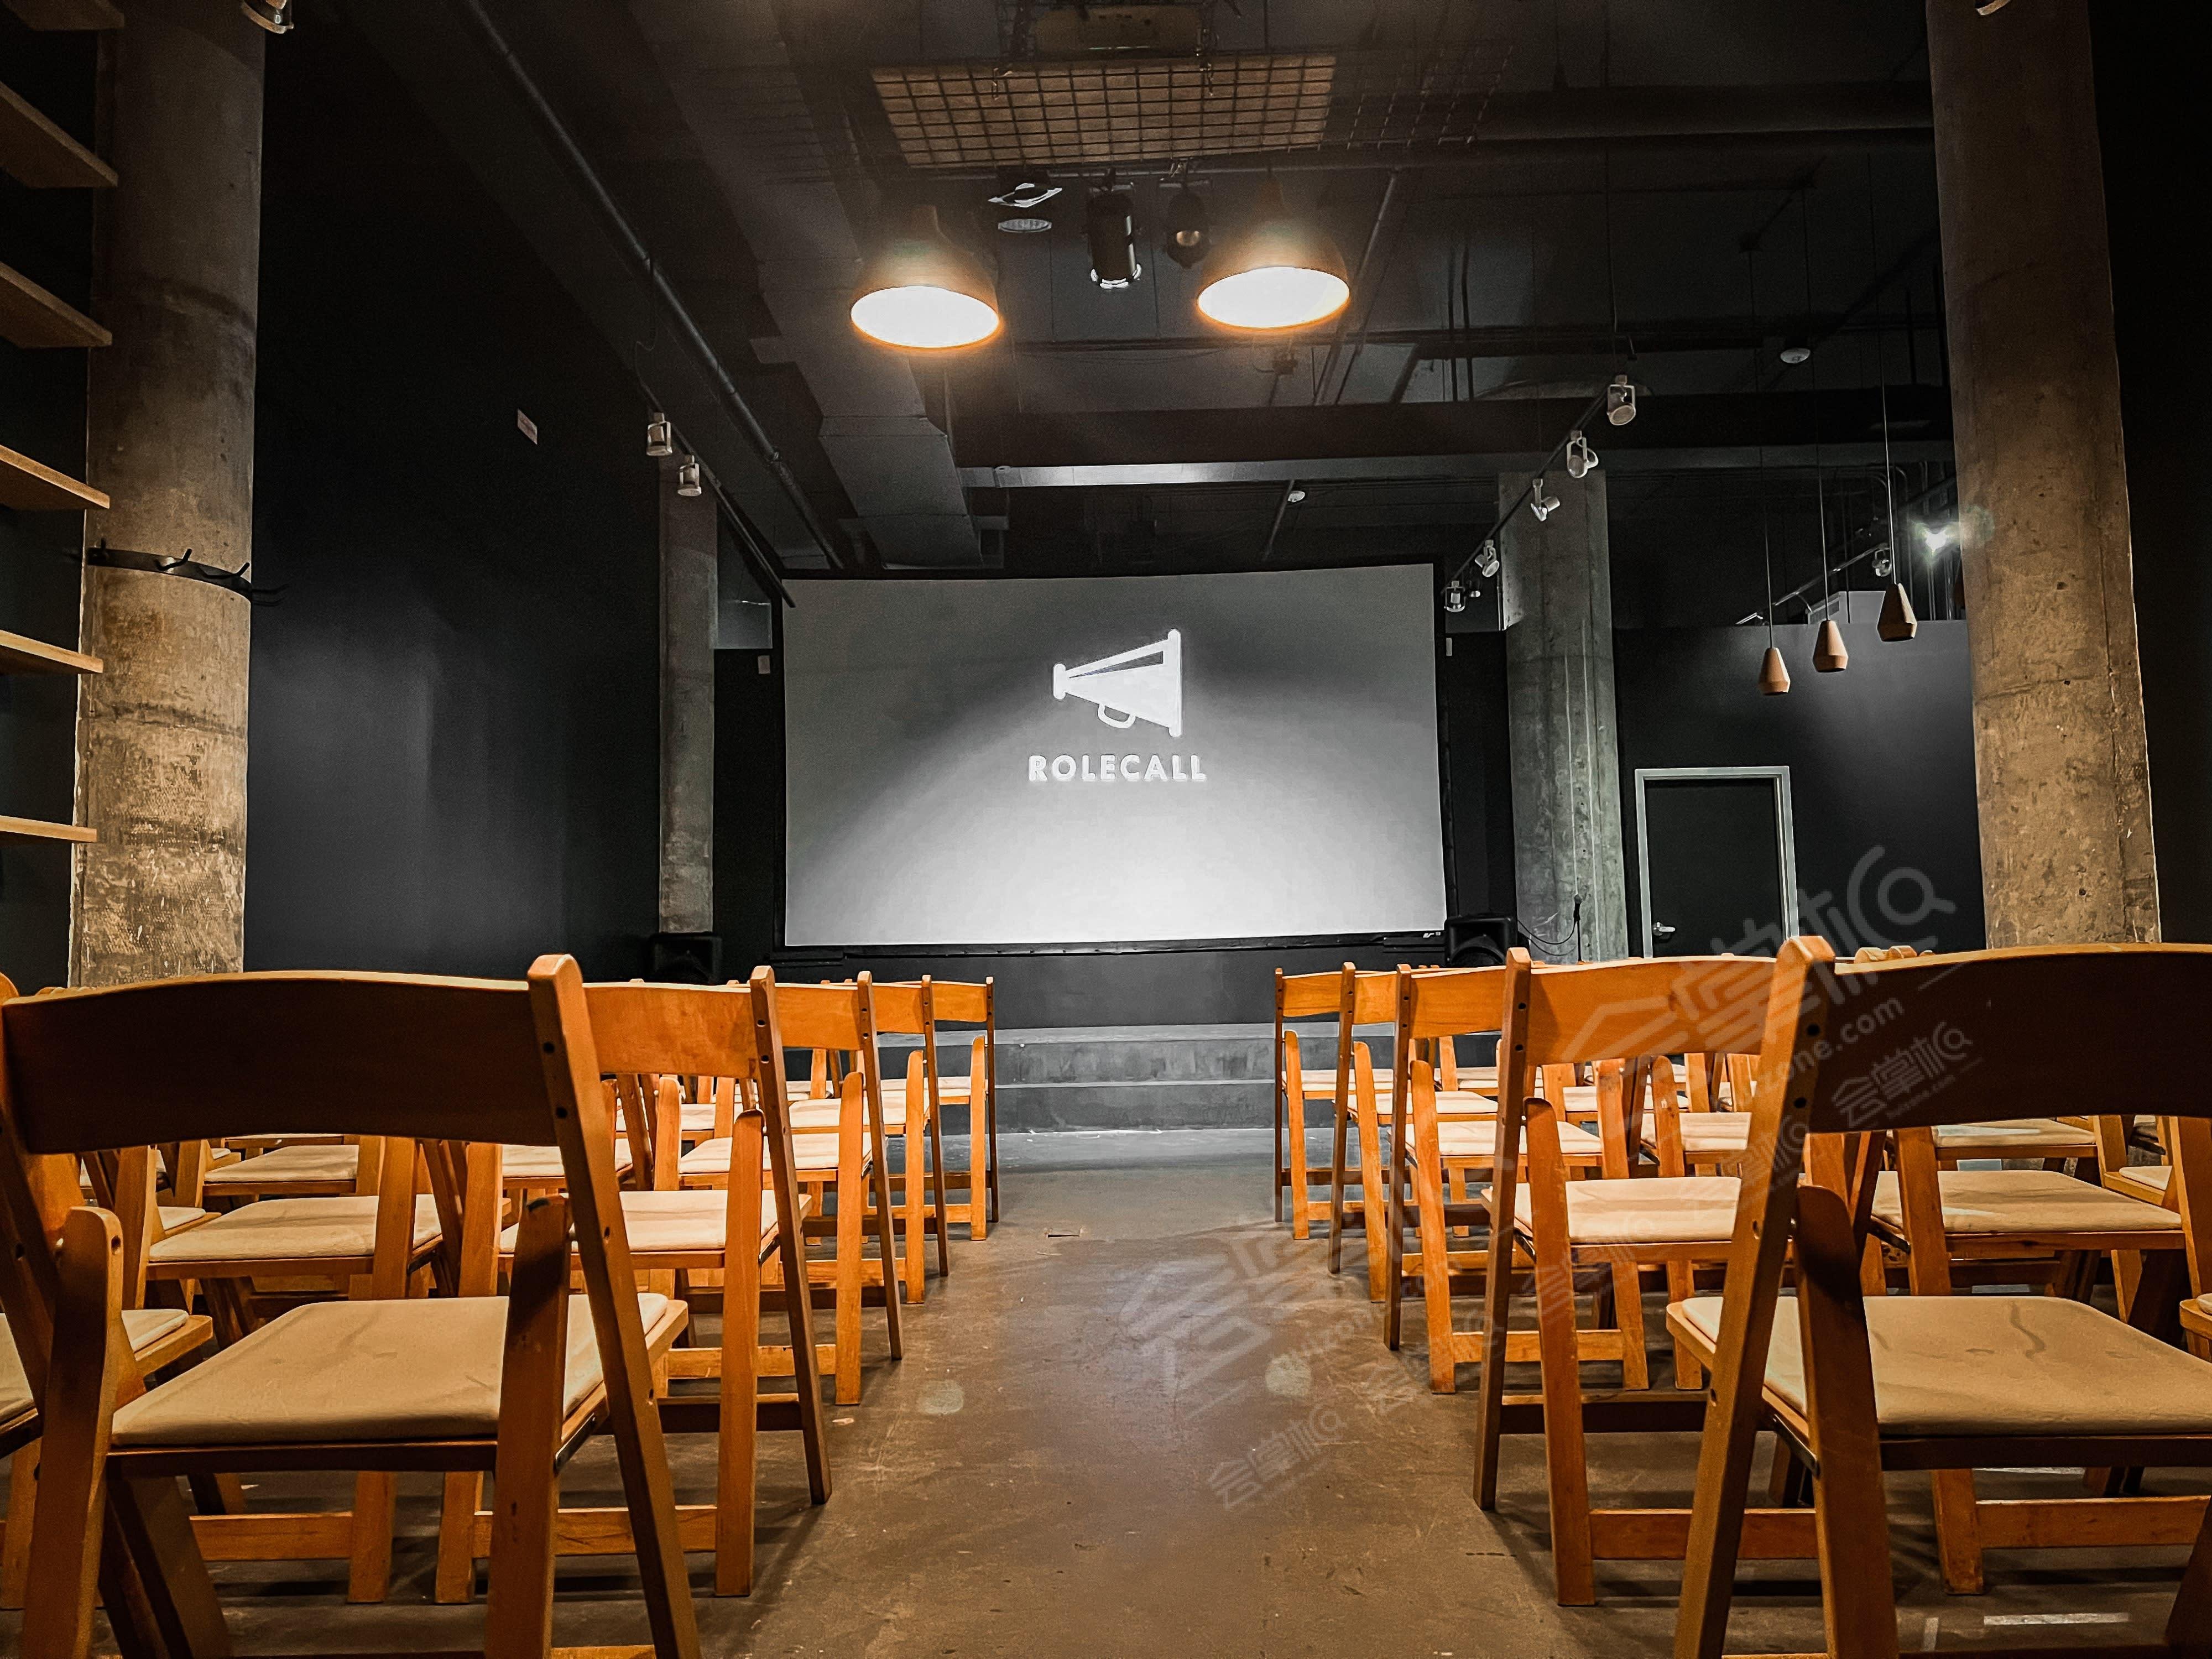 Stage and Screening Room at Ponce City Market